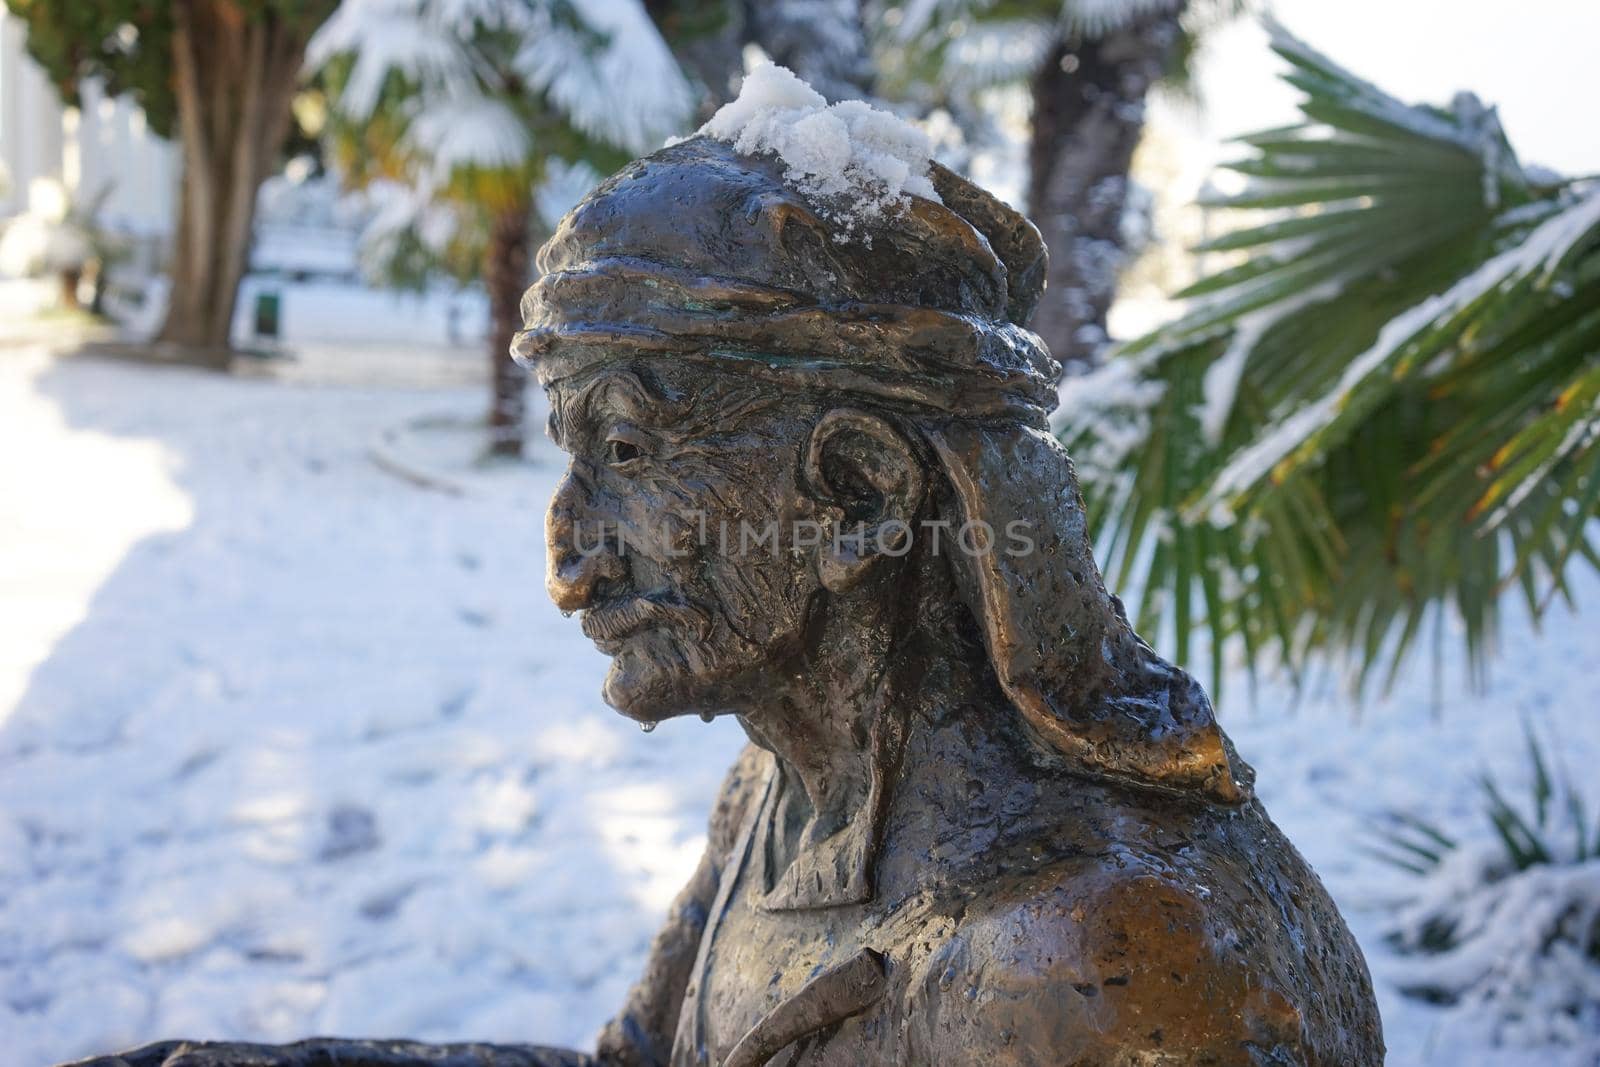 Sukhumi, Abkhazia-January 27, 2017: Urban landscape with sculpture on the background of snow and palm trees.